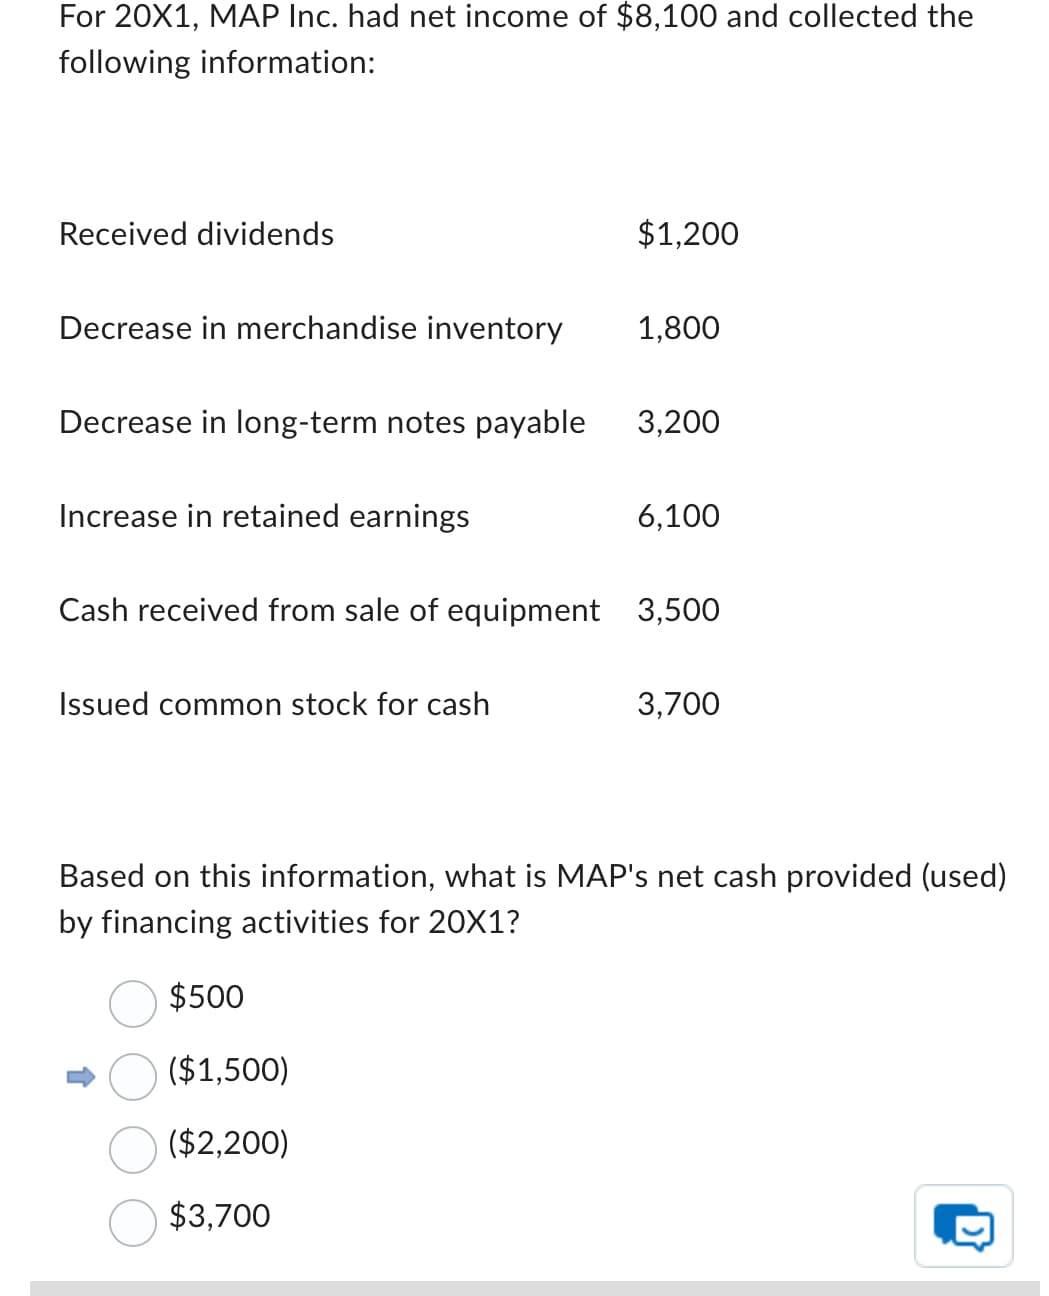 For 20X1, MAP Inc. had net income of $8,100 and collected the
following information:
Received dividends
$1,200
Decrease in merchandise inventory
1,800
Decrease in long-term notes payable
3,200
Increase in retained earnings
6,100
Cash received from sale of equipment 3,500
Issued common stock for cash
3,700
Based on this information, what is MAP's net cash provided (used)
by financing activities for 20X1?
$500
($1,500)
($2,200)
$3,700
D